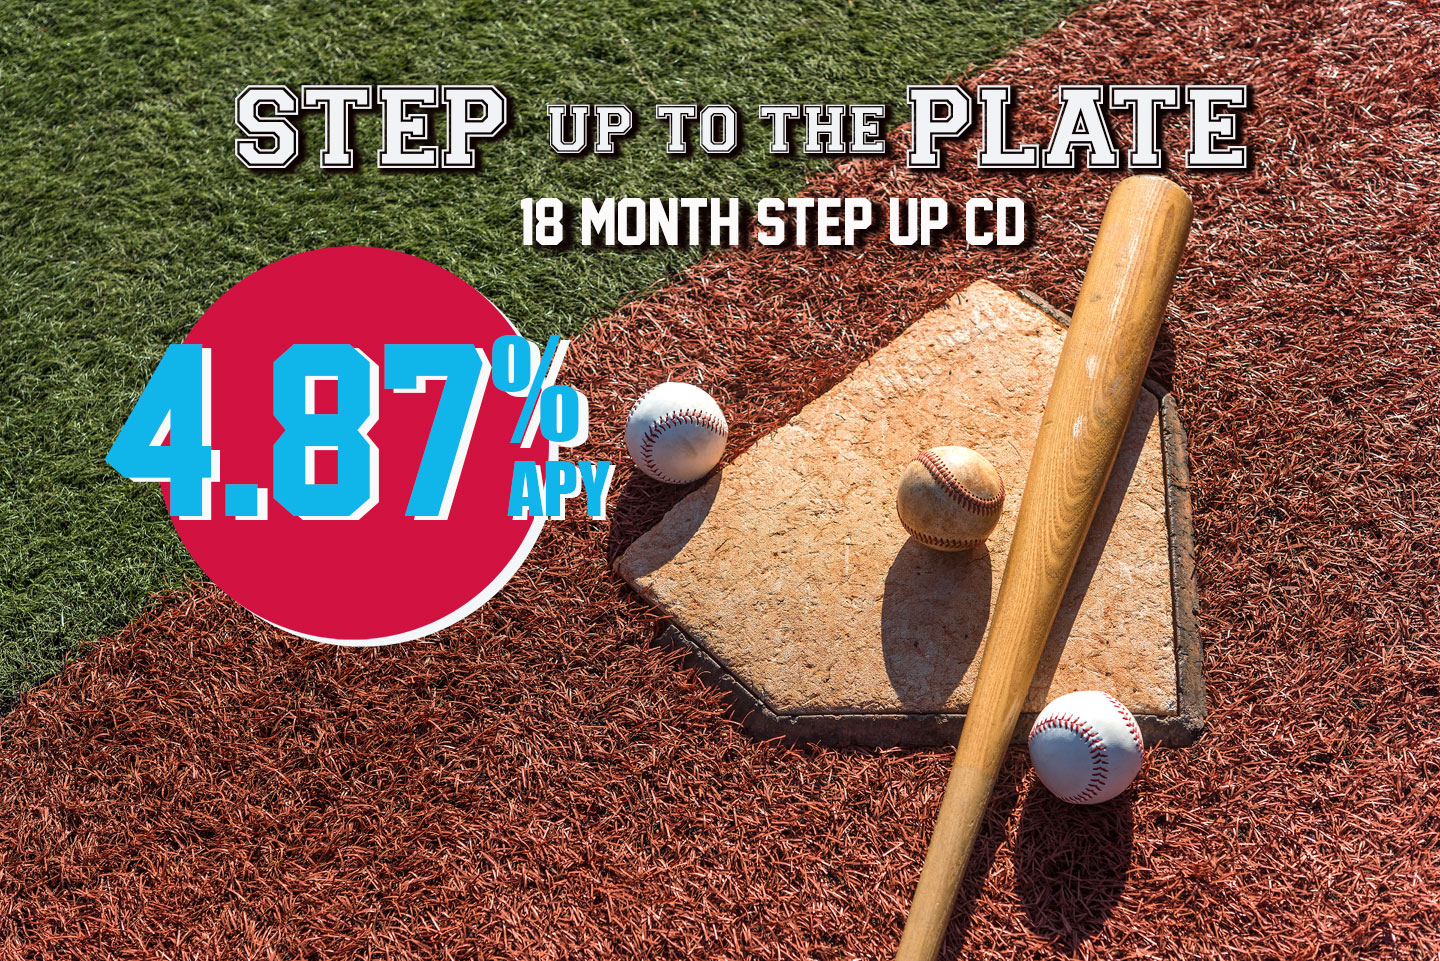 Step Up to the Plate 18 Month Step Up CD 4.87% APY